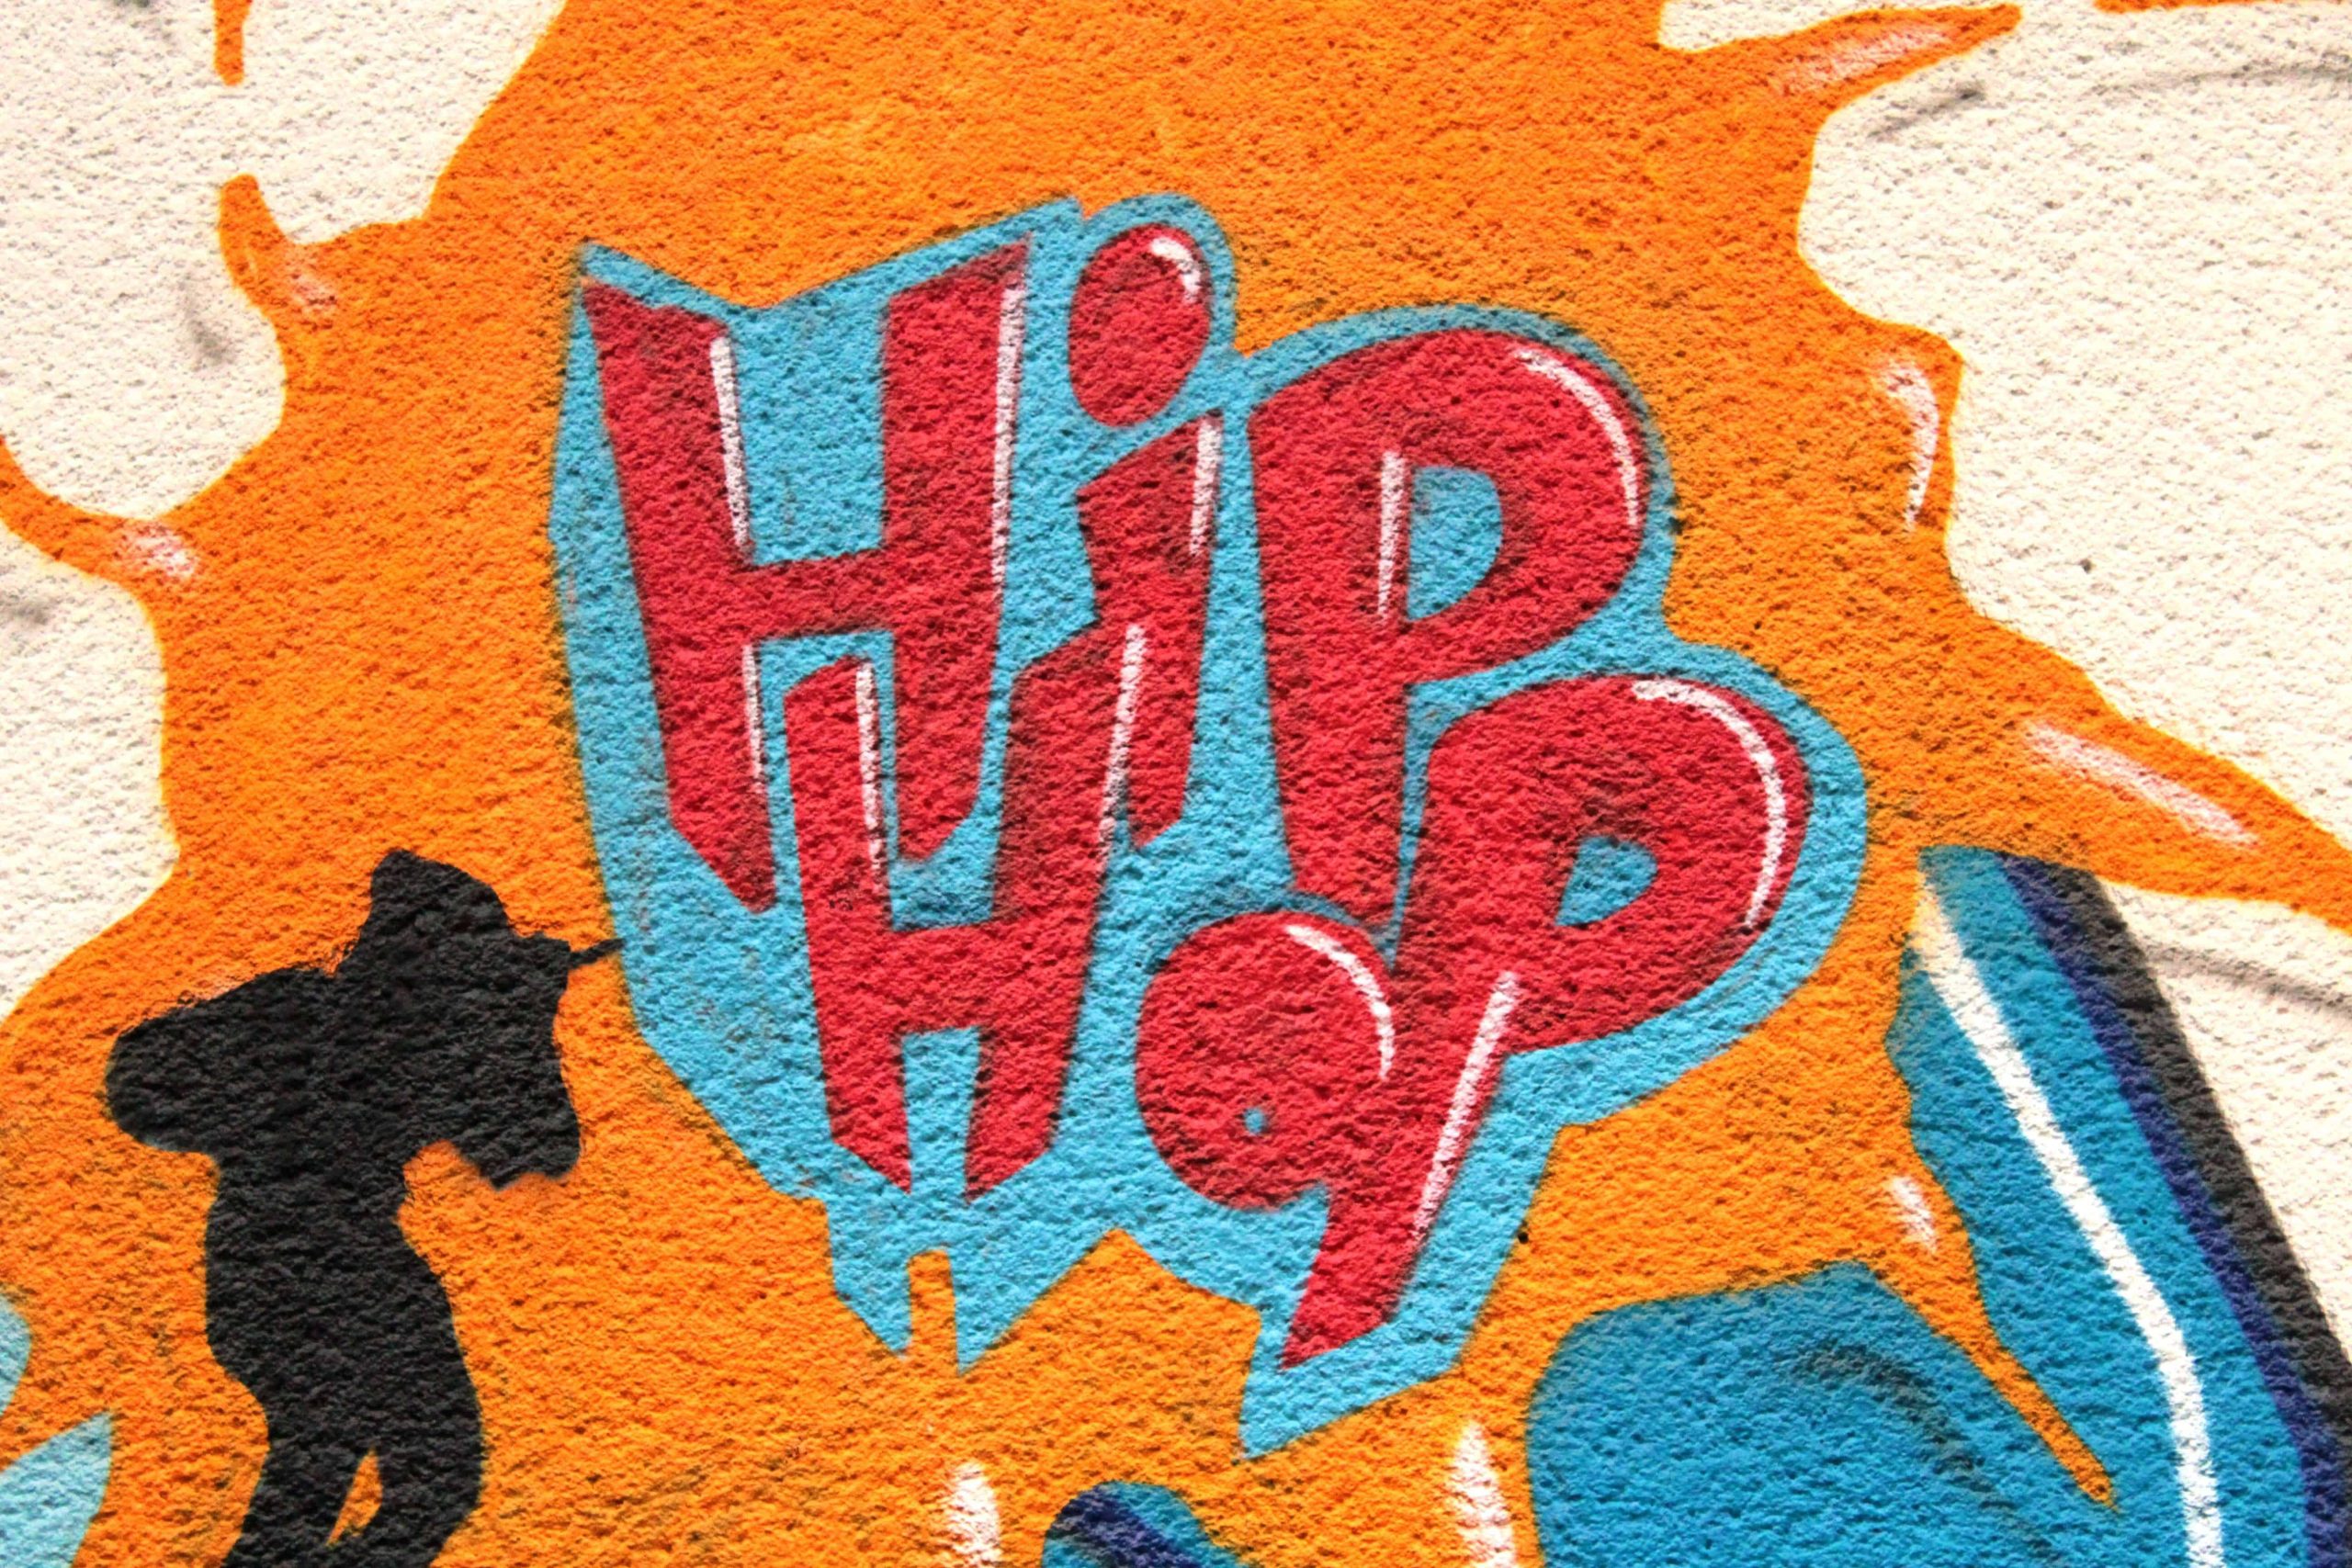 The Criterion Channel announces 50th anniversary of Hip-Hop film program